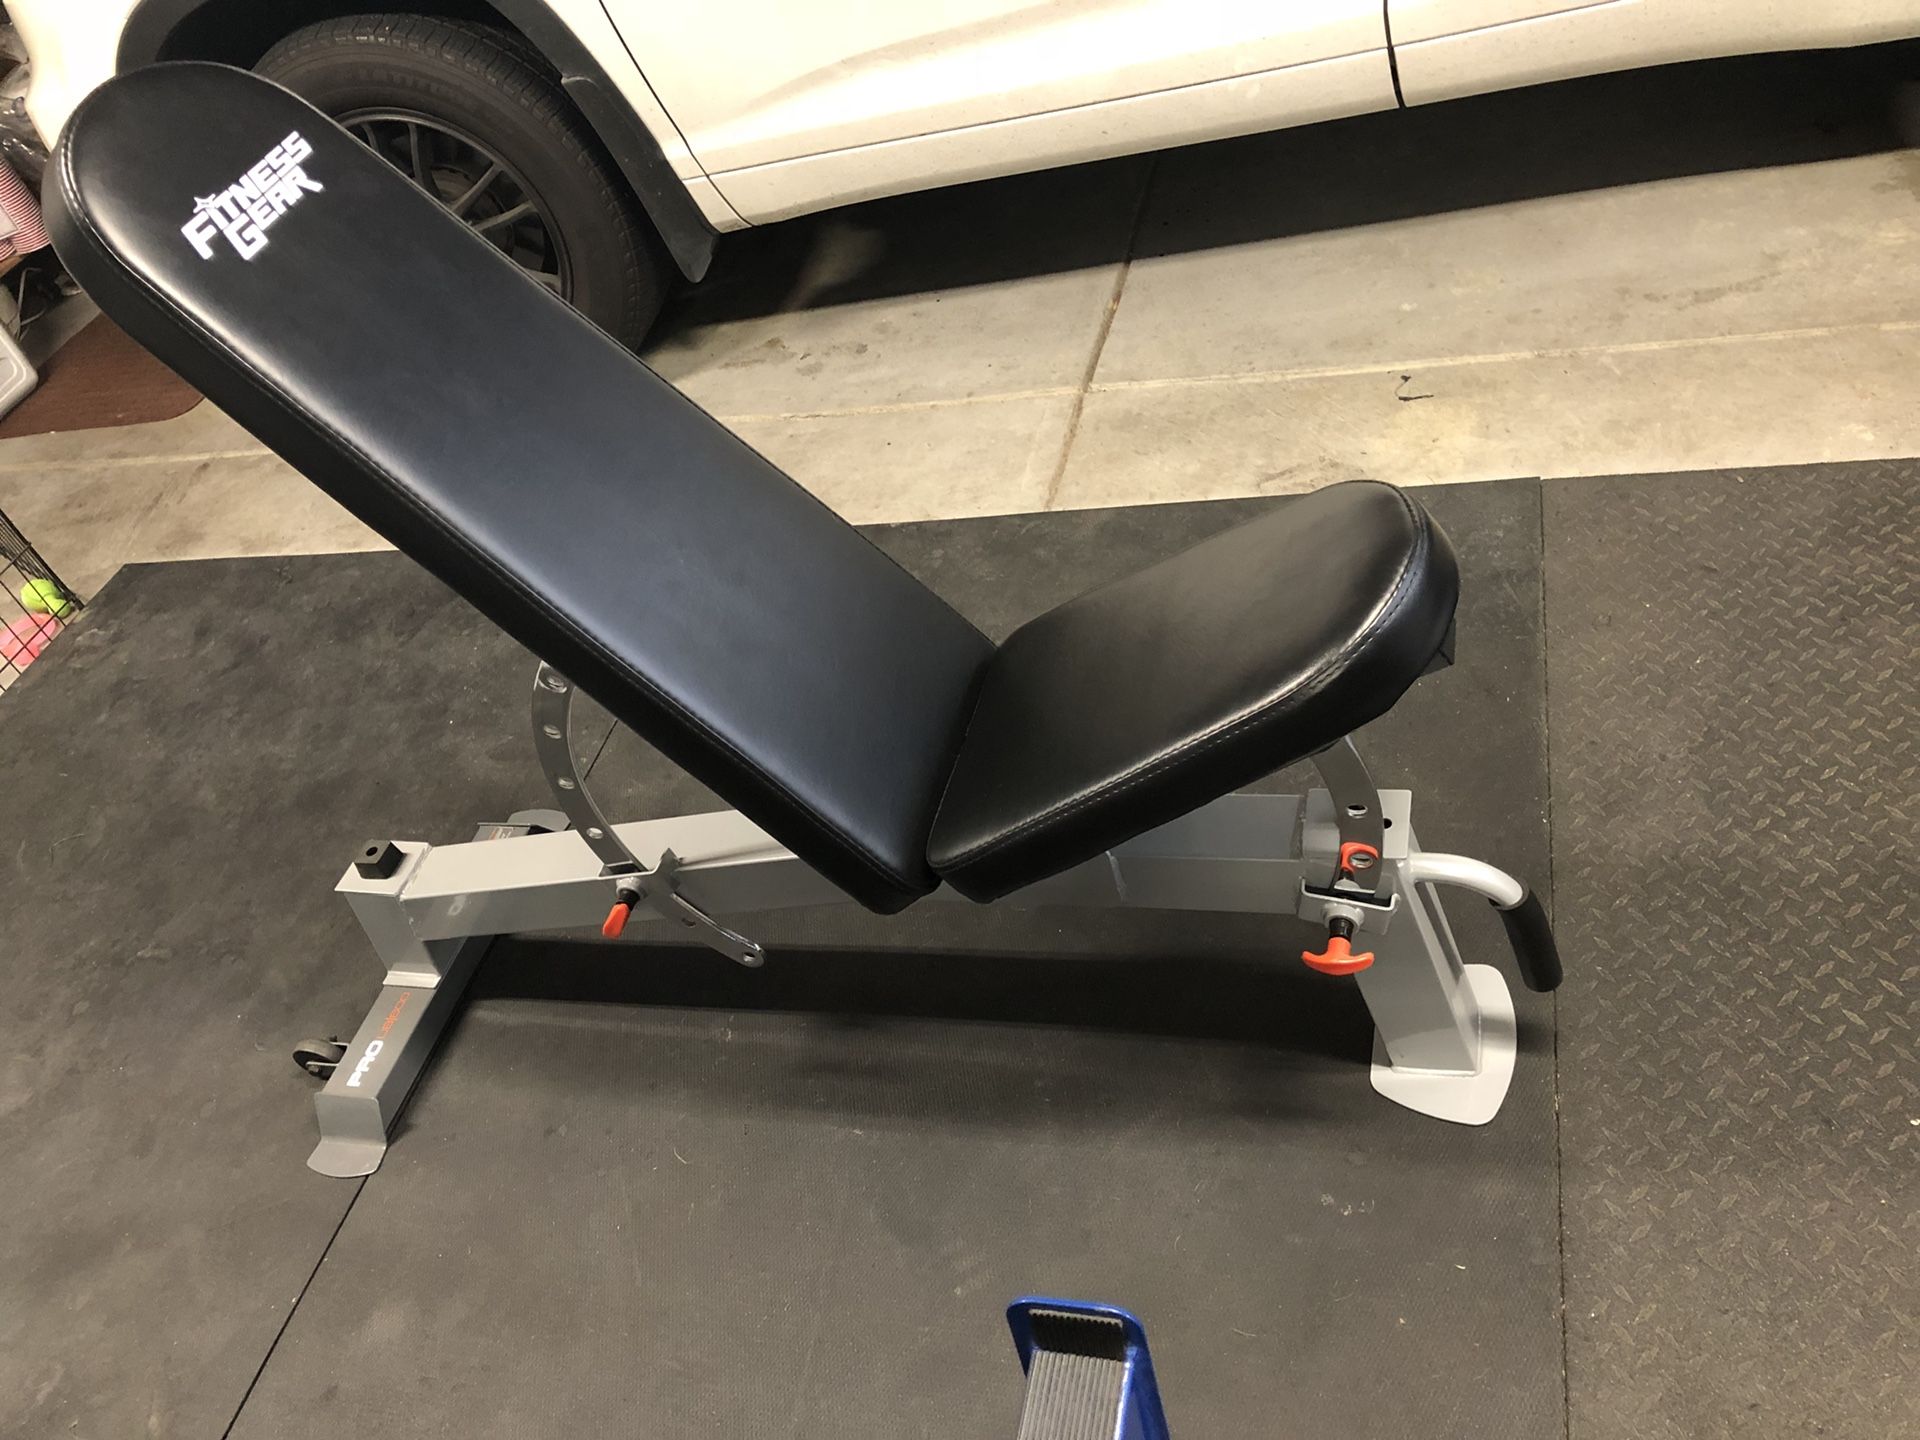 Selling a lightly used Fitness Gear PRO UB600 Utility FID Weight Bench which retails for $180